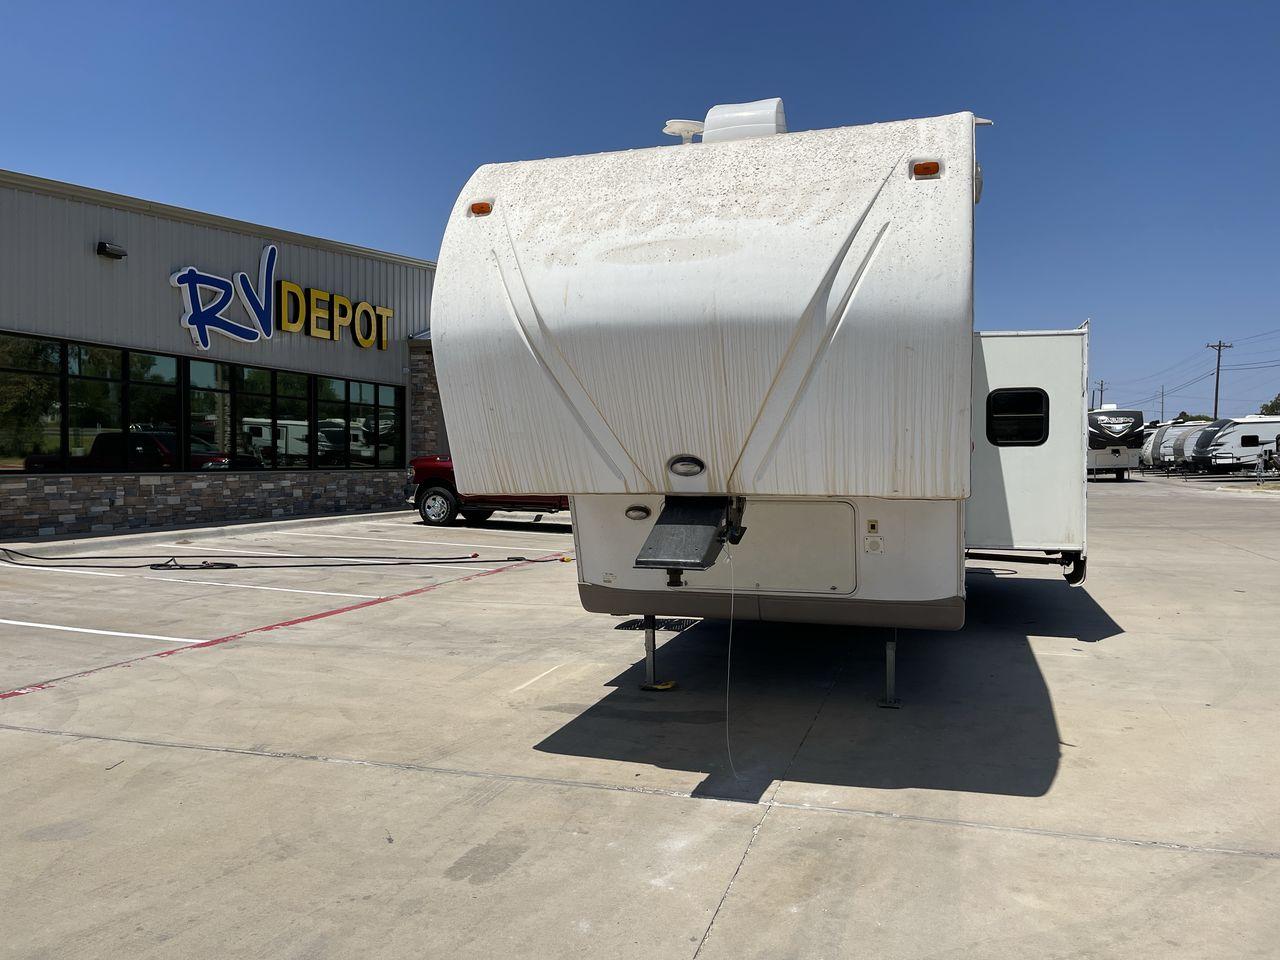 2010 WHITE FLAGSTAFF 8528CKSS - (4X4FFLD20A1) , Length: 30 ft. | Dry Weight: 6,877 lbs. | Slides: 2 transmission, located at 4319 N Main Street, Cleburne, TX, 76033, (817) 221-0660, 32.435829, -97.384178 - The 2010 Flagstaff 8528CKSS CT is a well-crafted and compact travel trailer designed for comfort and convenience on the road. With a length of 30 feet 11 inches, a width of 8 feet, and a height of 12 feet 7 inches, this trailer offers a balance of space and maneuverability. Its thoughtful constructi - Photo #0